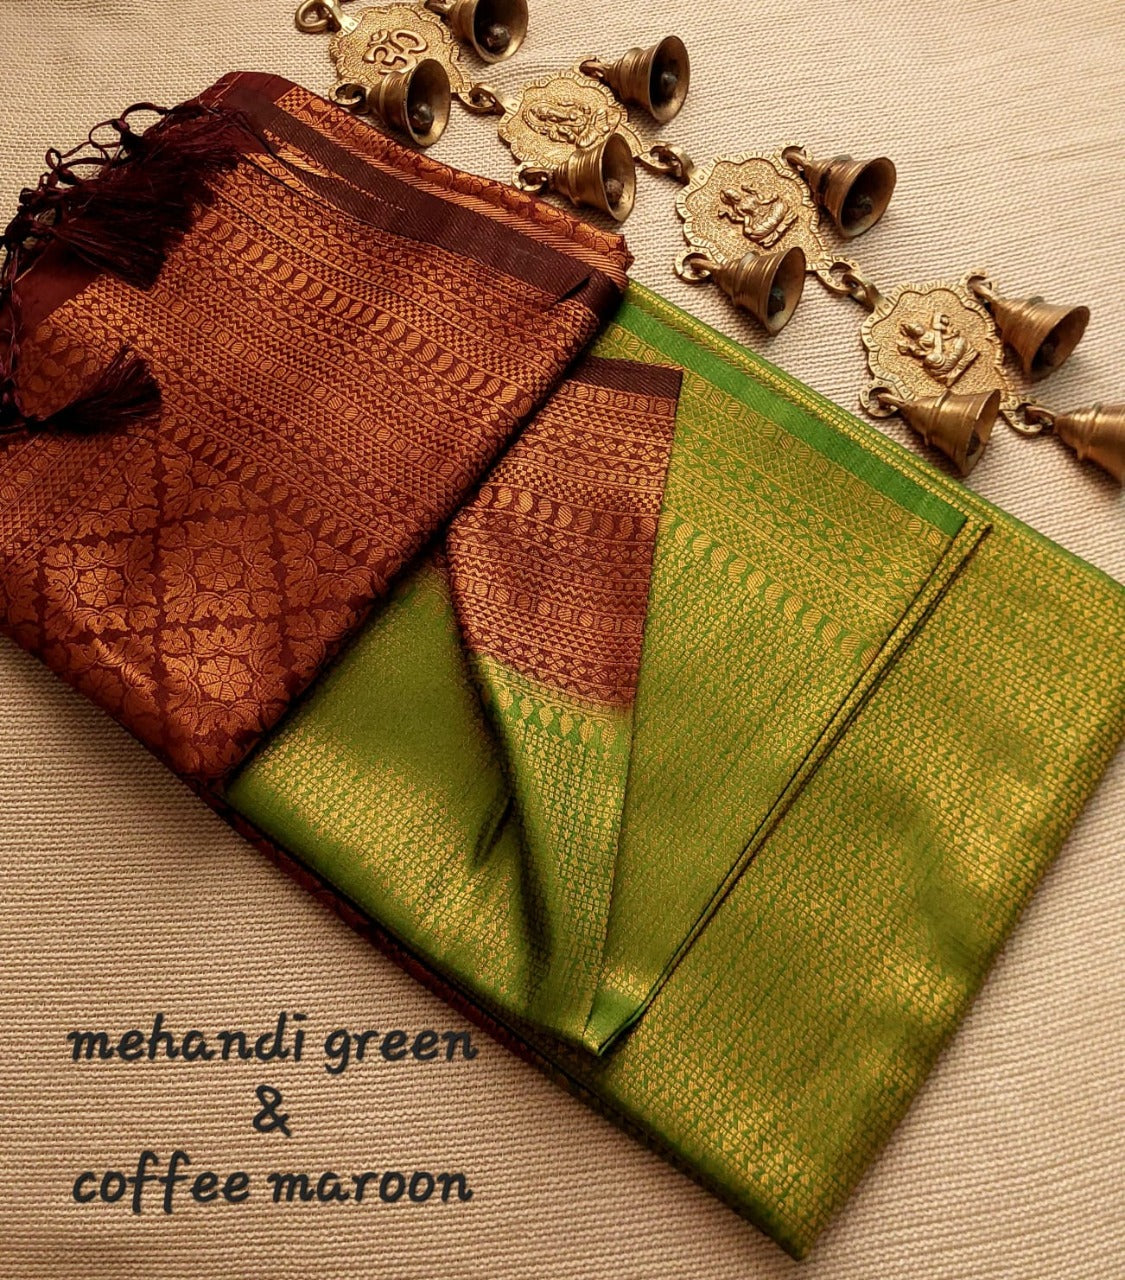 Green  Colour Traditional Looking Silk Saree